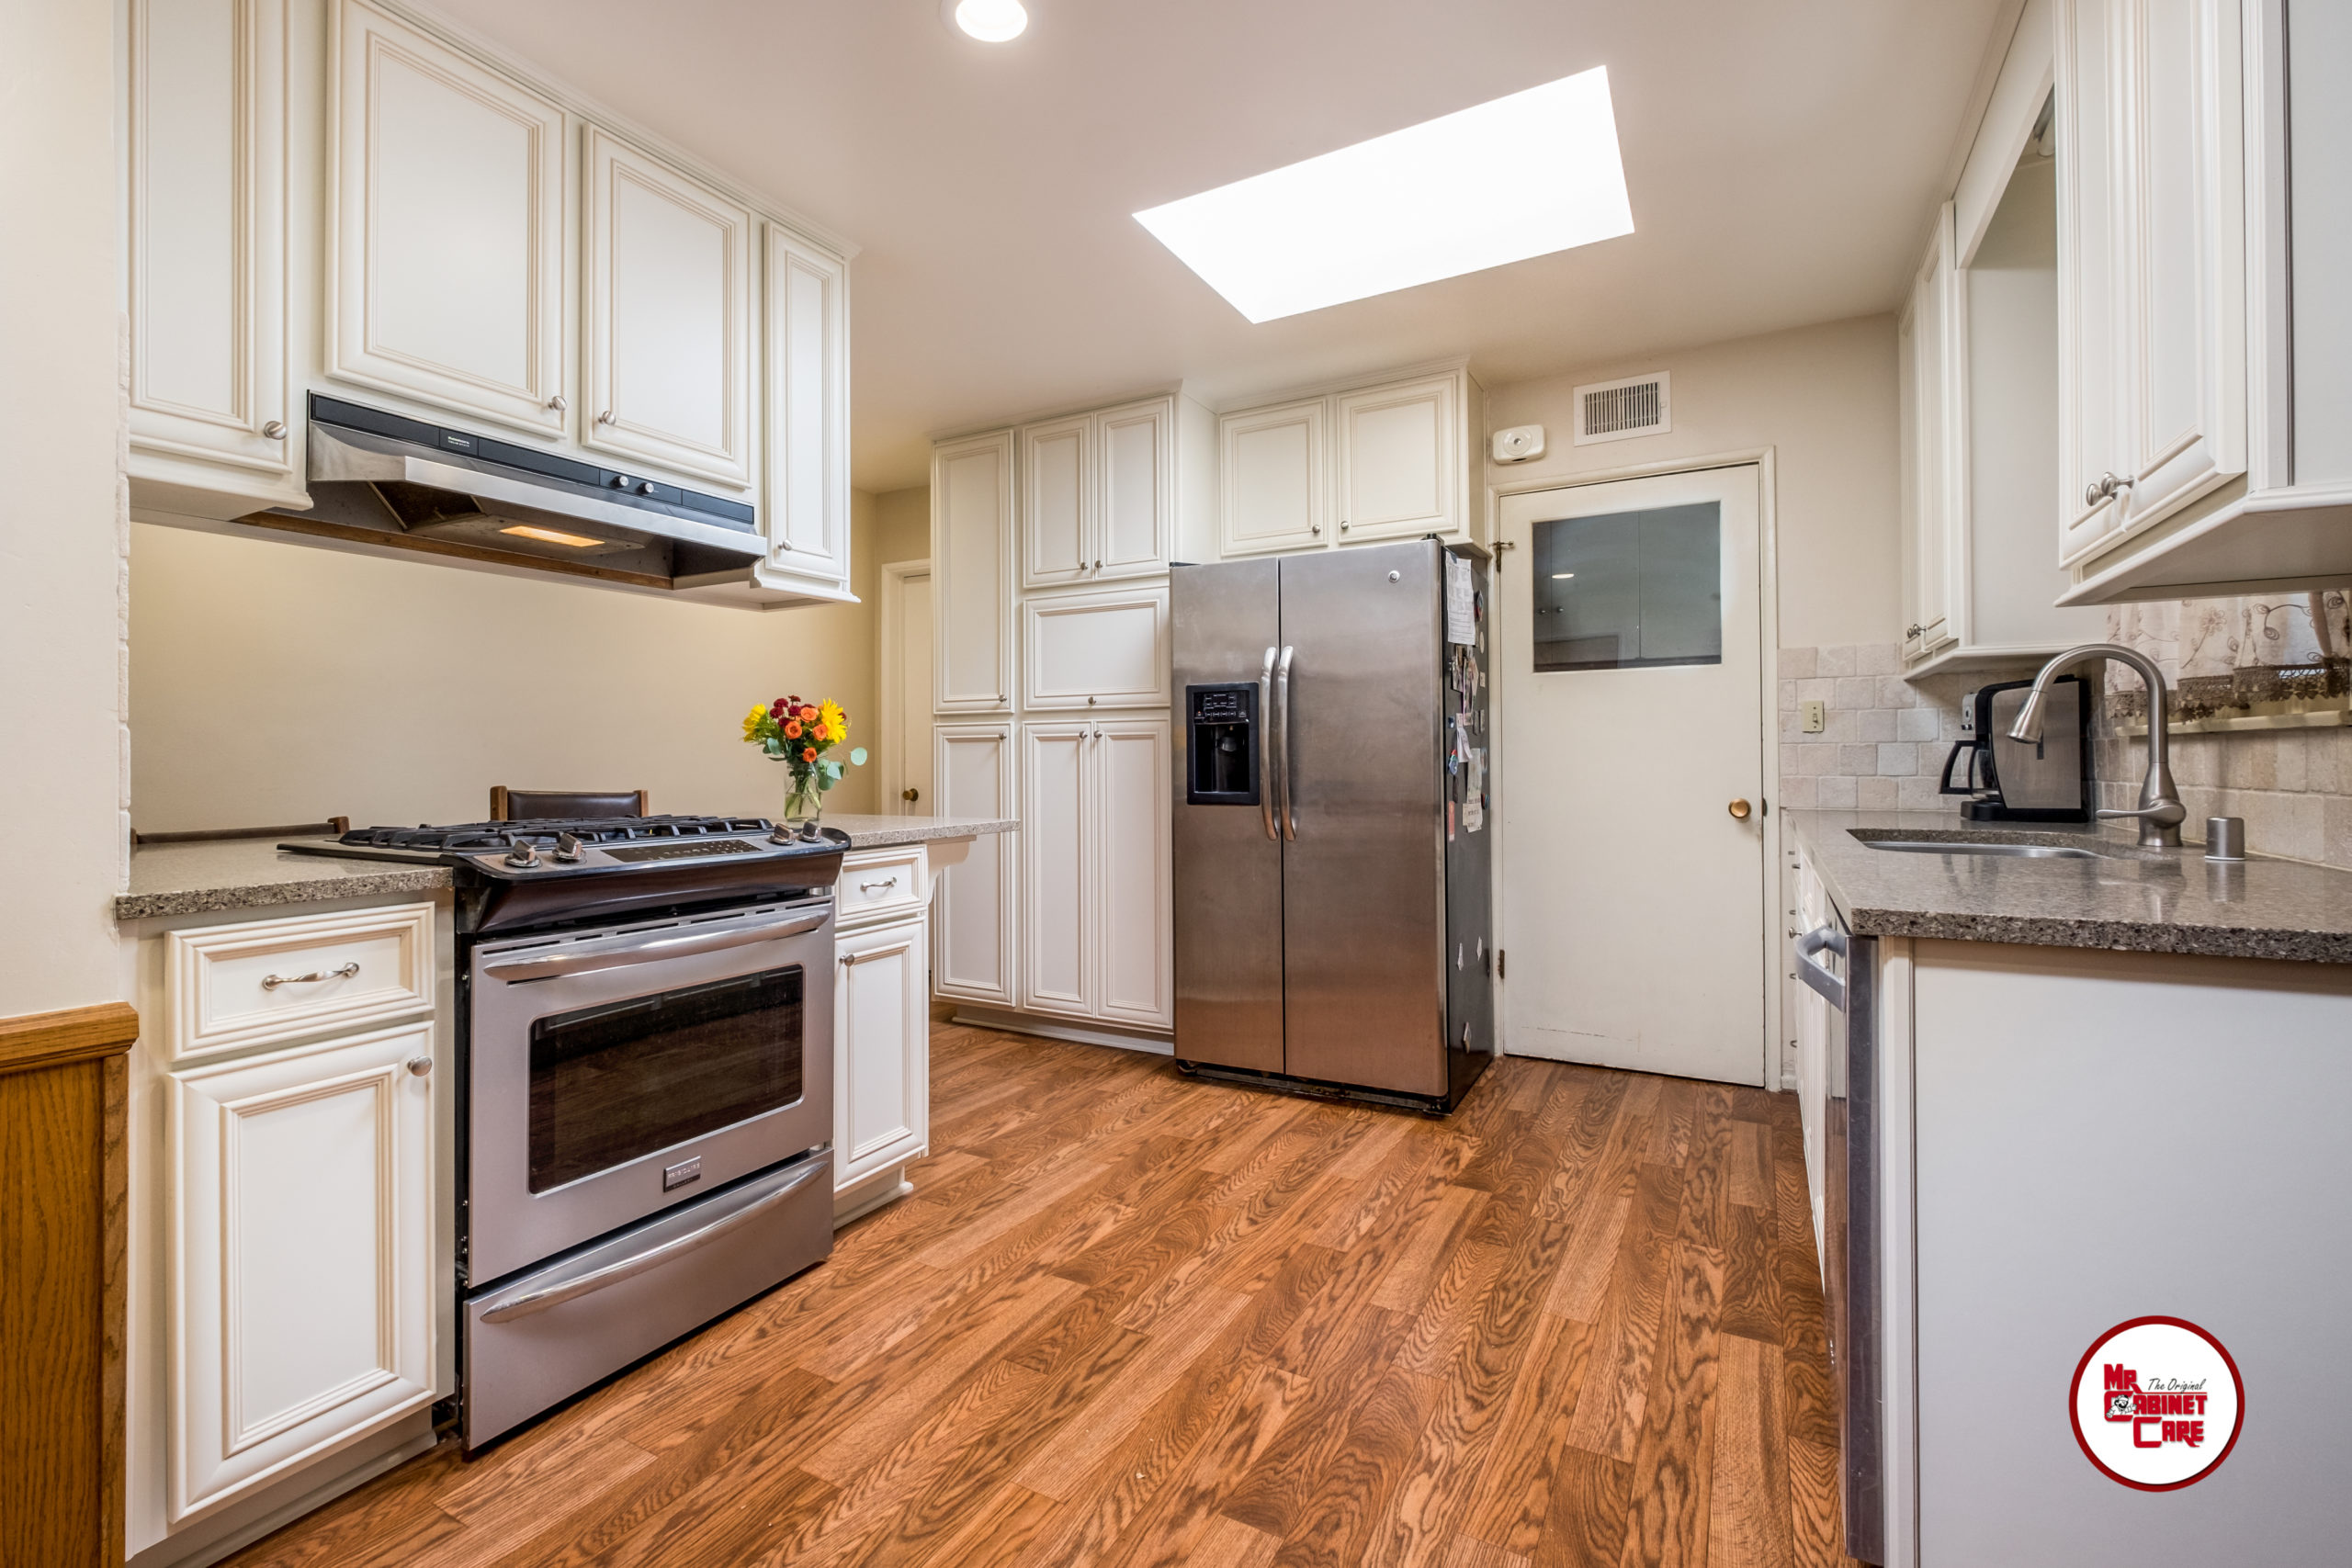 kitchen isand and table costa mesa